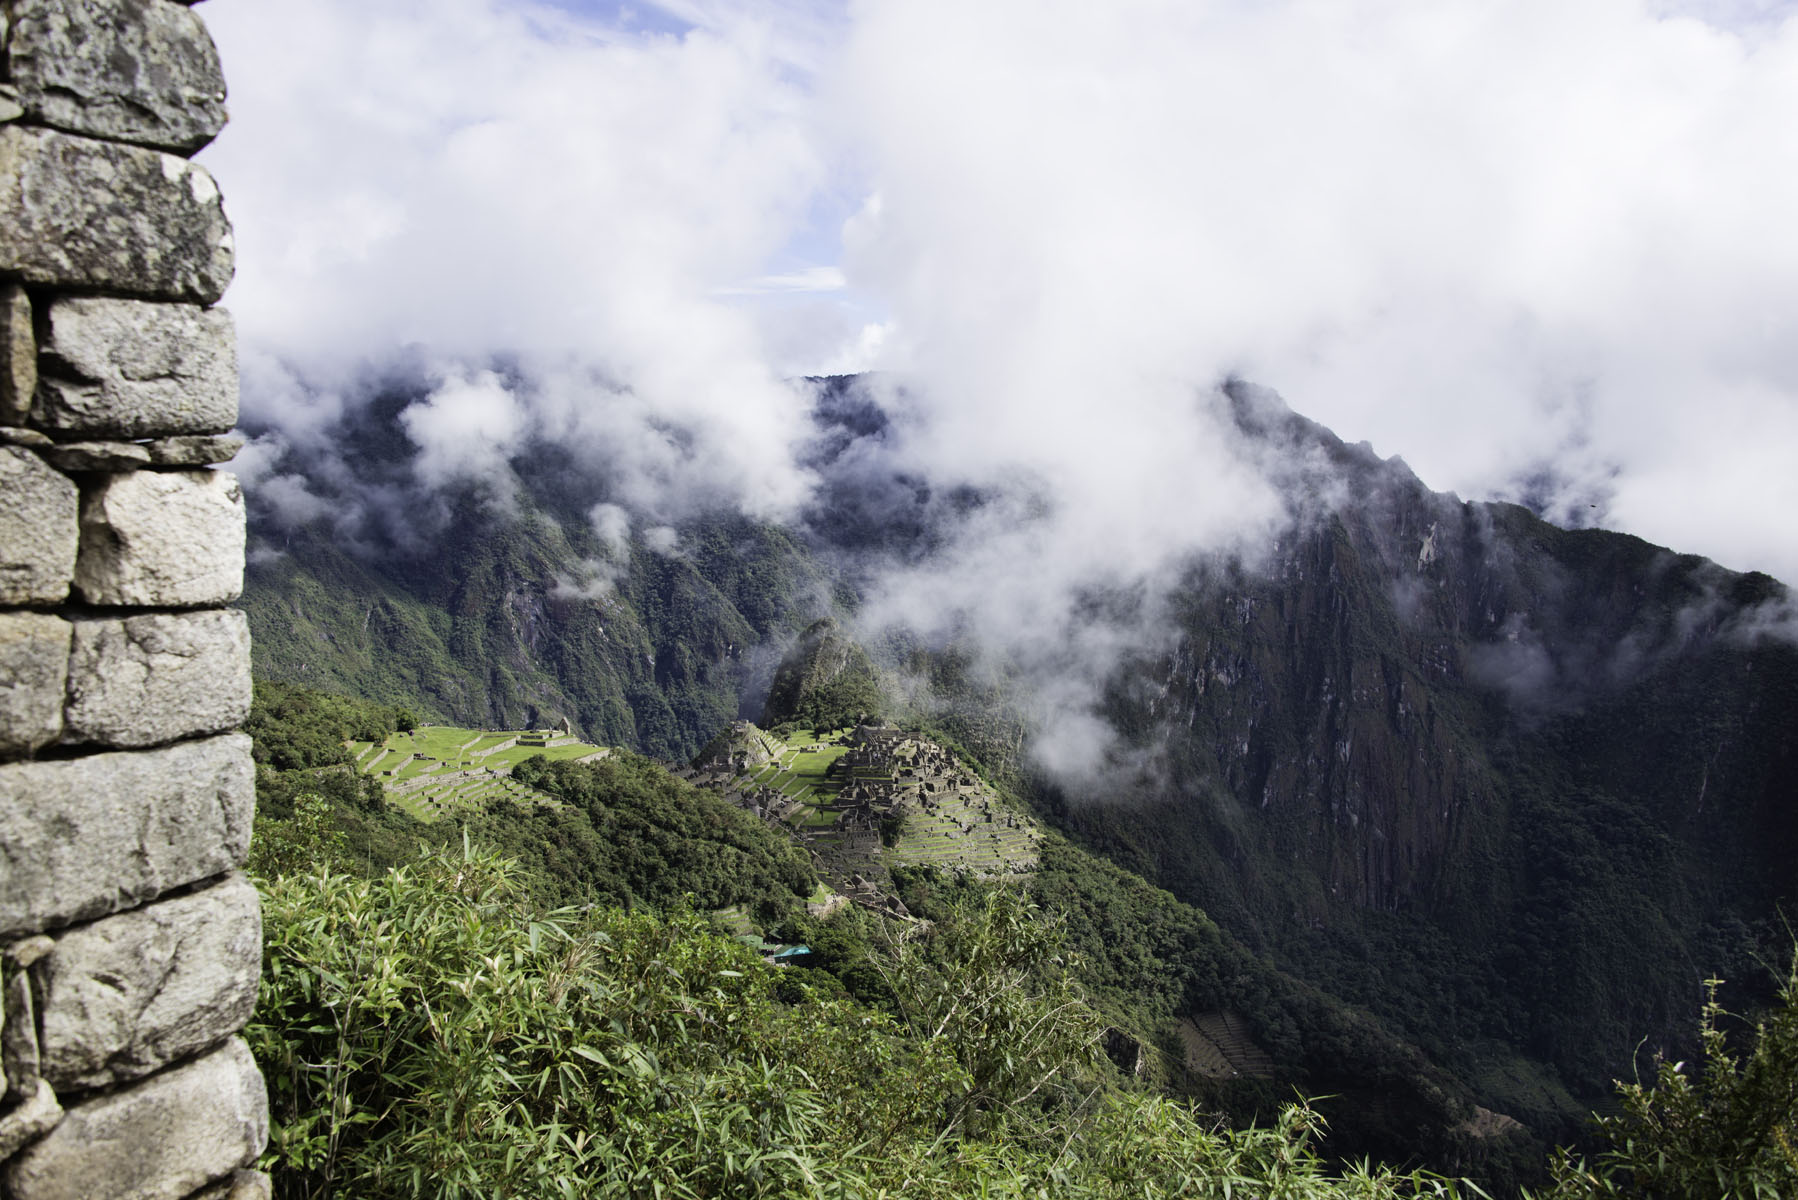 Distant View of Machu Picchu City in the Clouds